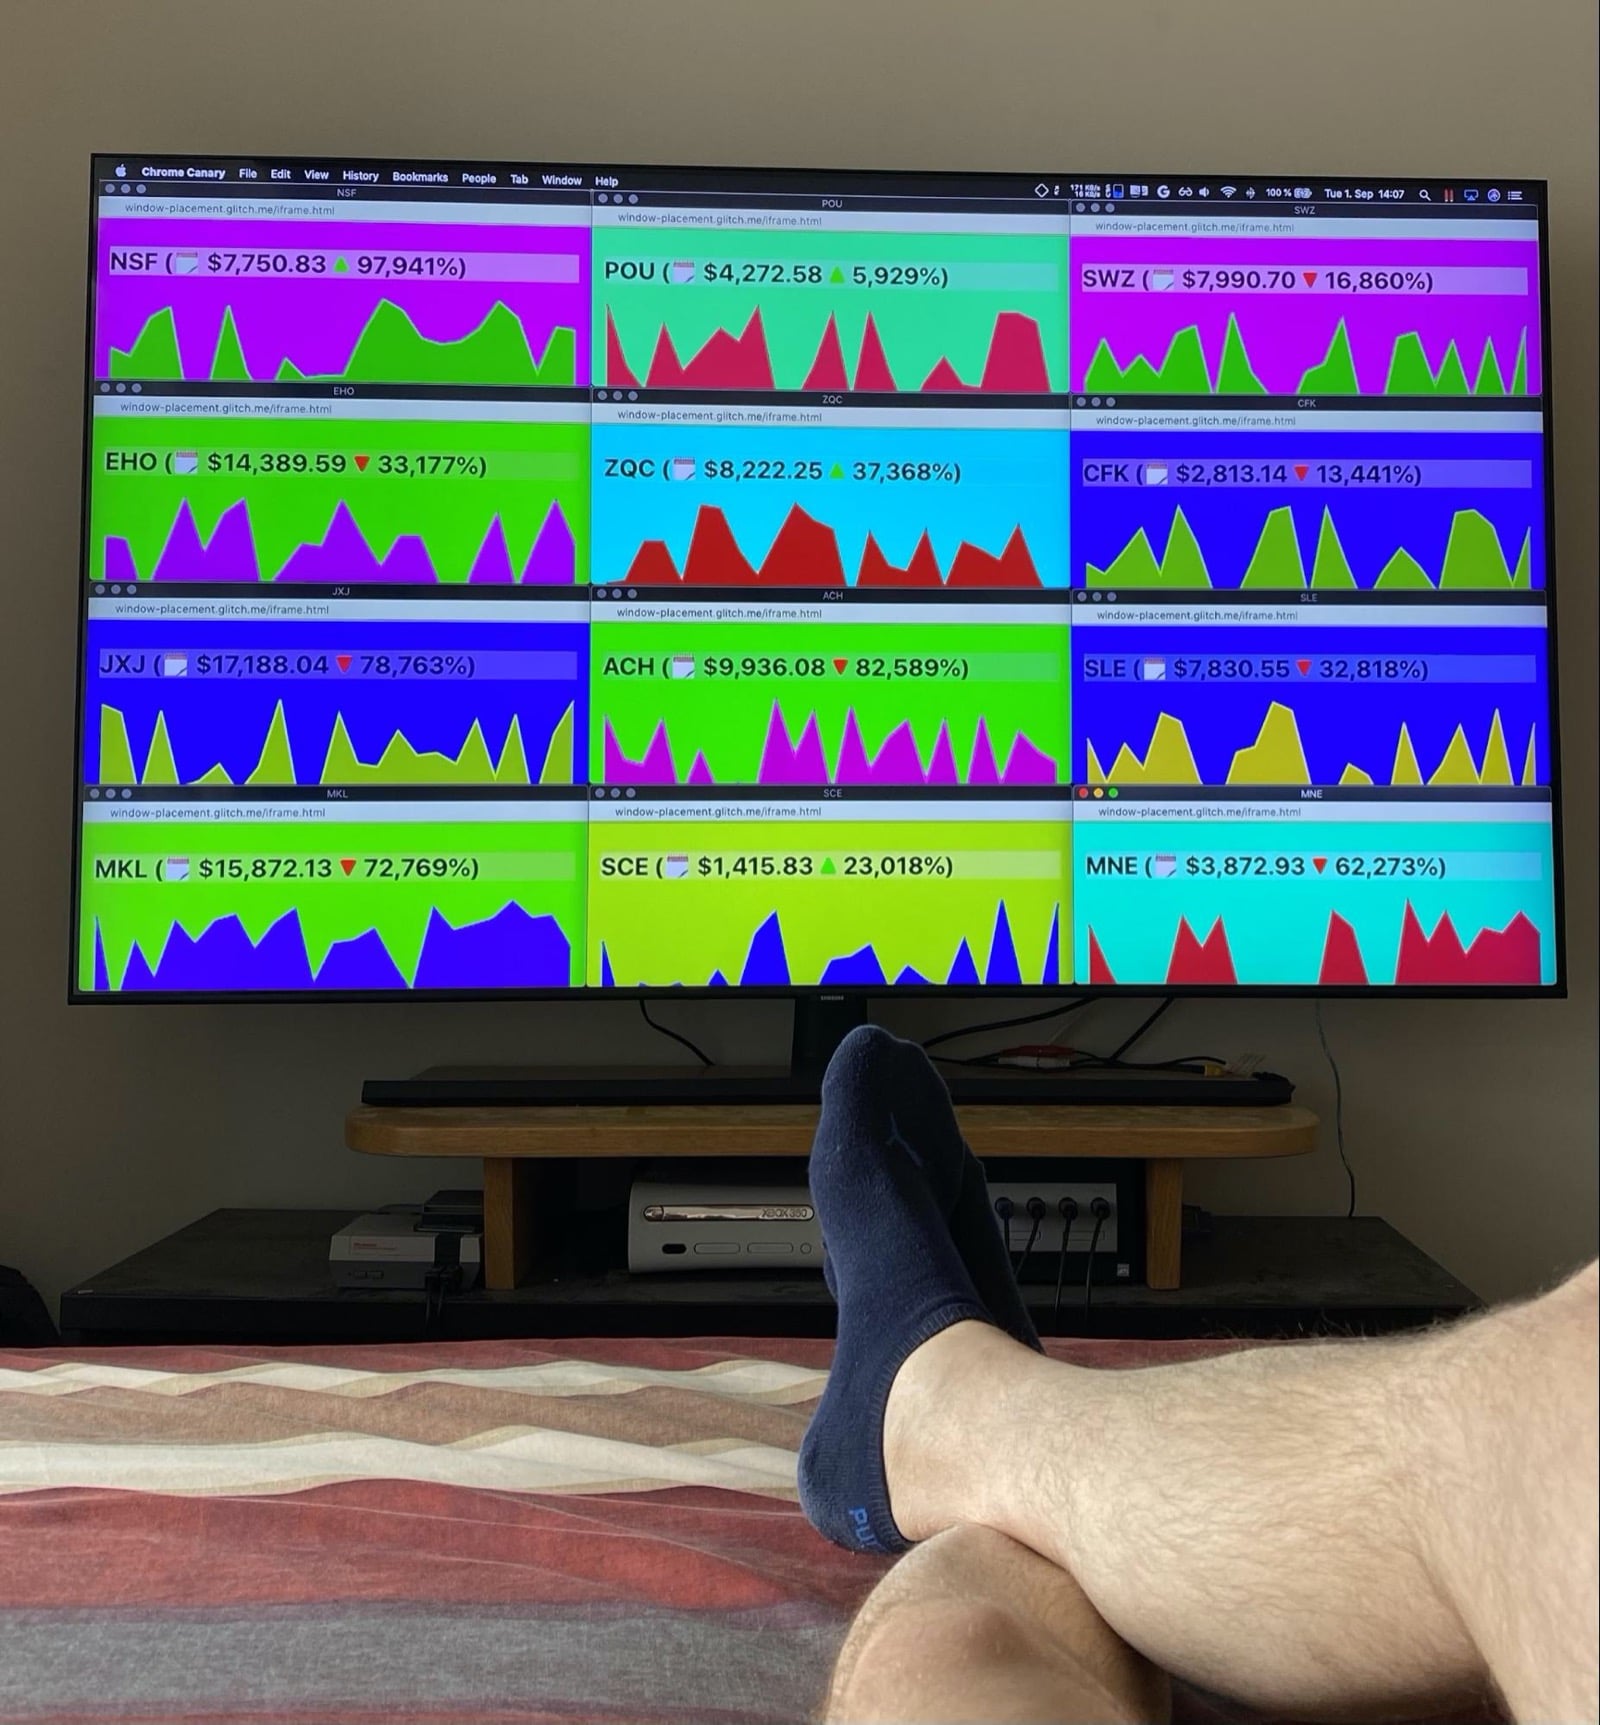 Massive TV screen at the end of a bed with the author's legs partly visible. On the screen, a fake crypto currency trading desk. 